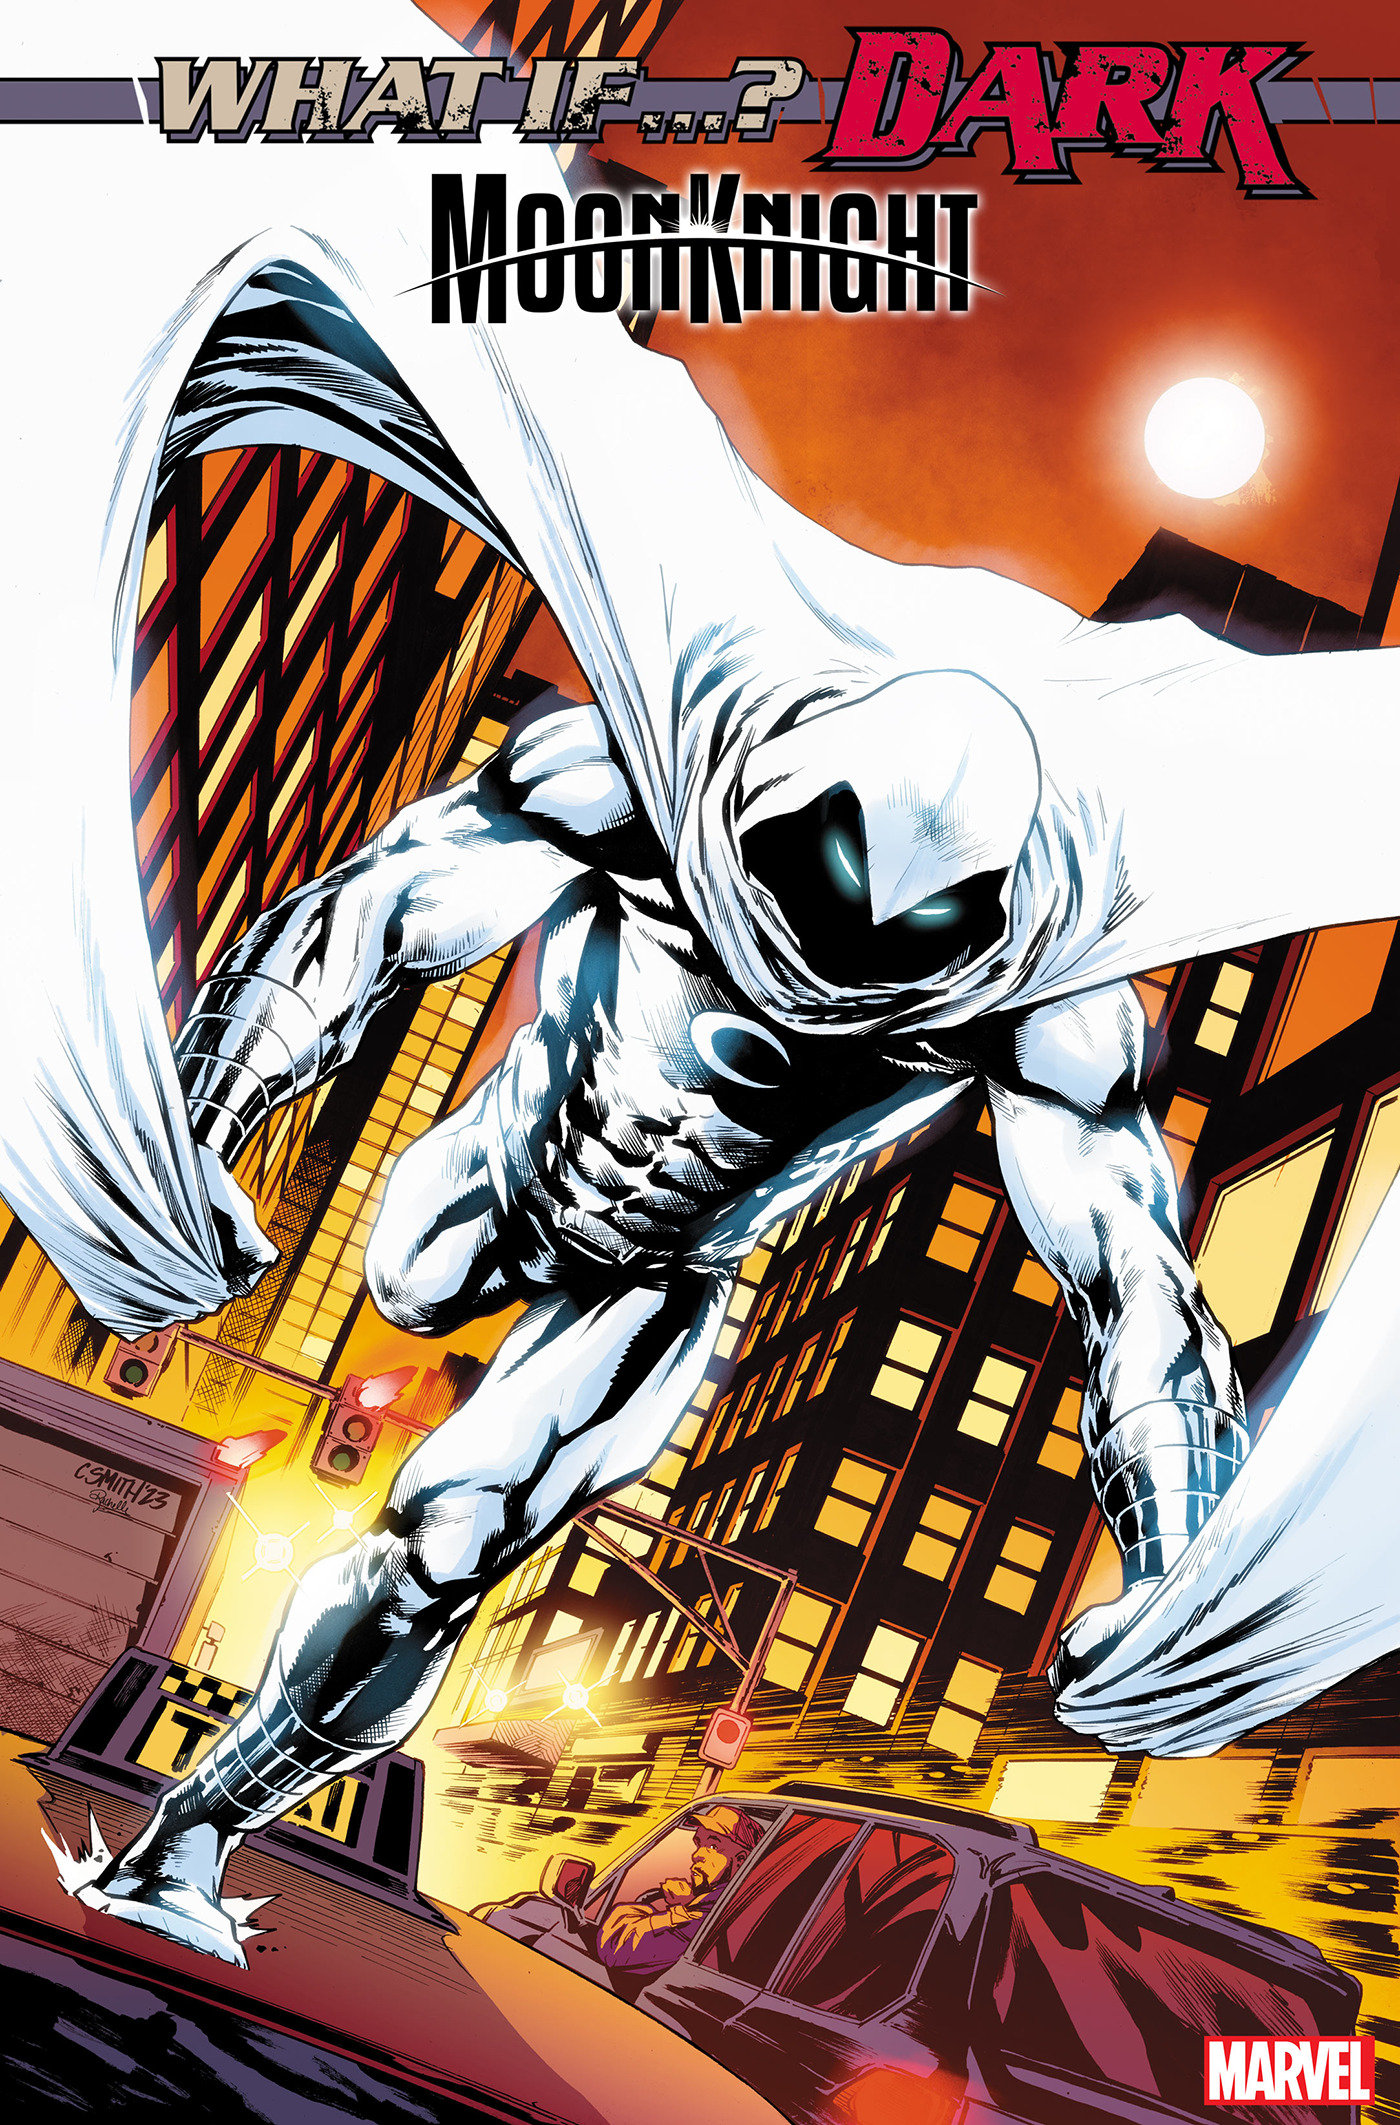 What If...? Dark Moon Knight #1 Cory Smith Variant